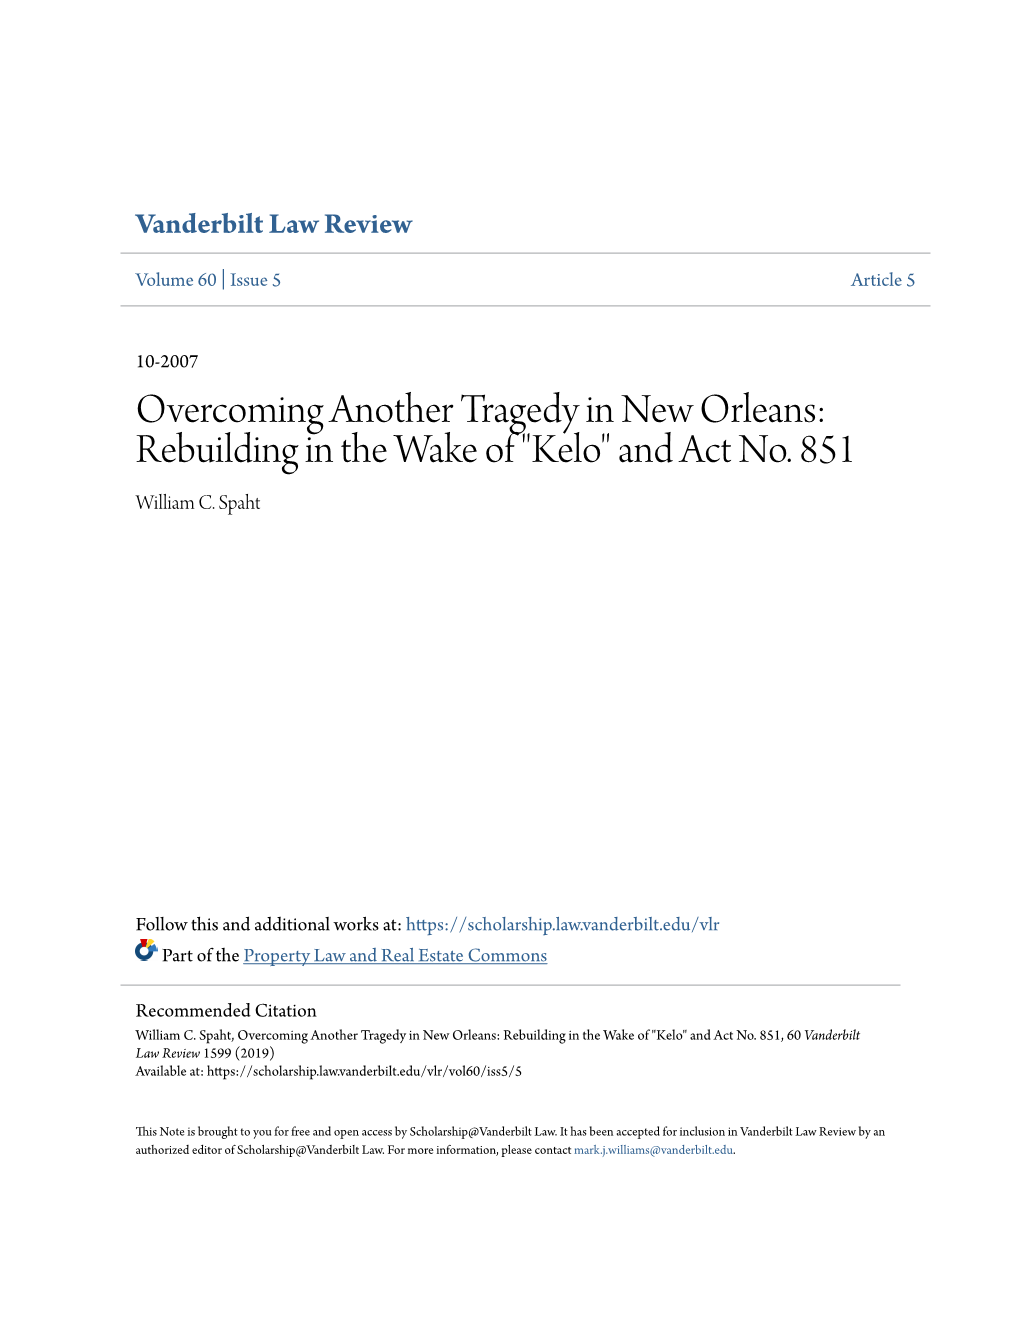 Overcoming Another Tragedy in New Orleans: Rebuilding in the Wake of "Kelo" and Act No